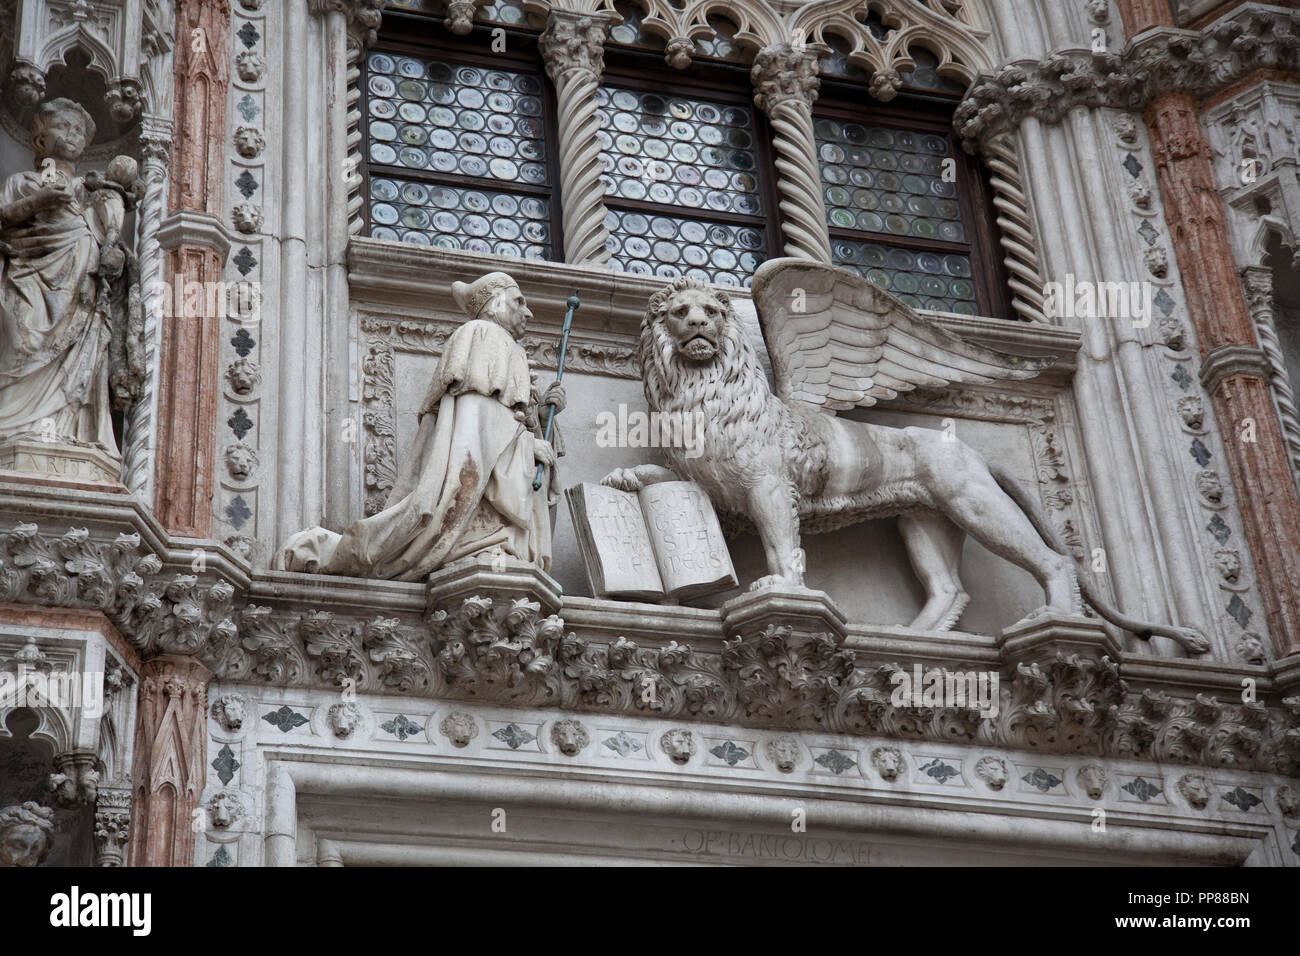 The winged lion of St Mark. Inscription: PAX TIBI MARCE EVANGELISTA MEVS The Lion of Saint Mark, representing the evangelist St Mark, pictured in the  Stock Photo